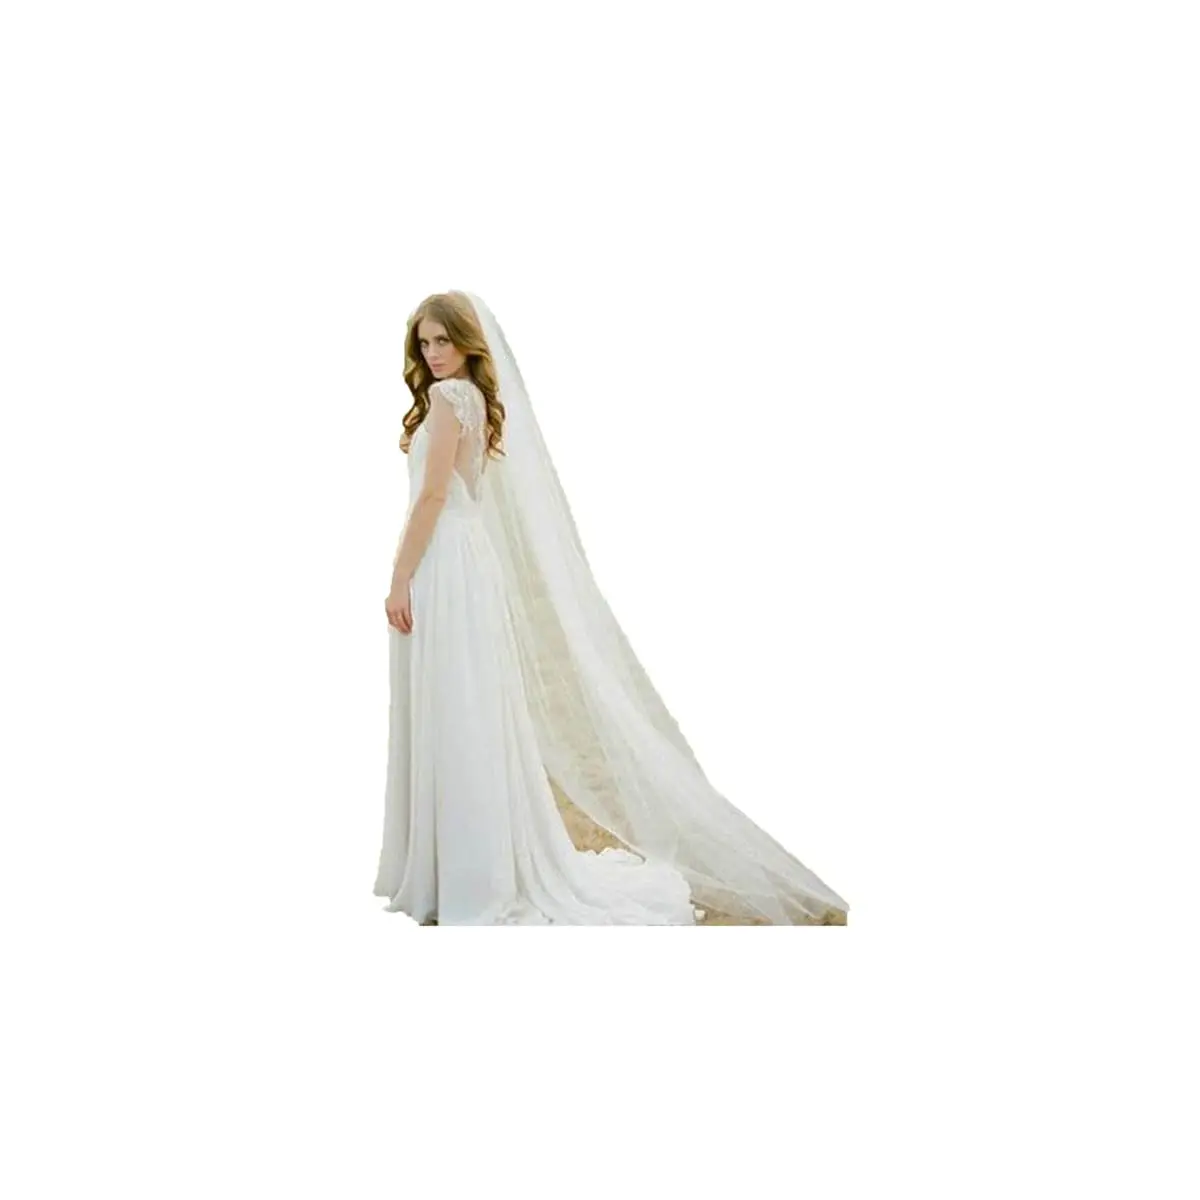 

Bride Wedding Veil 1 Tier Cathedral Long Veils For Brides Soft Tulle Bridal With Comb